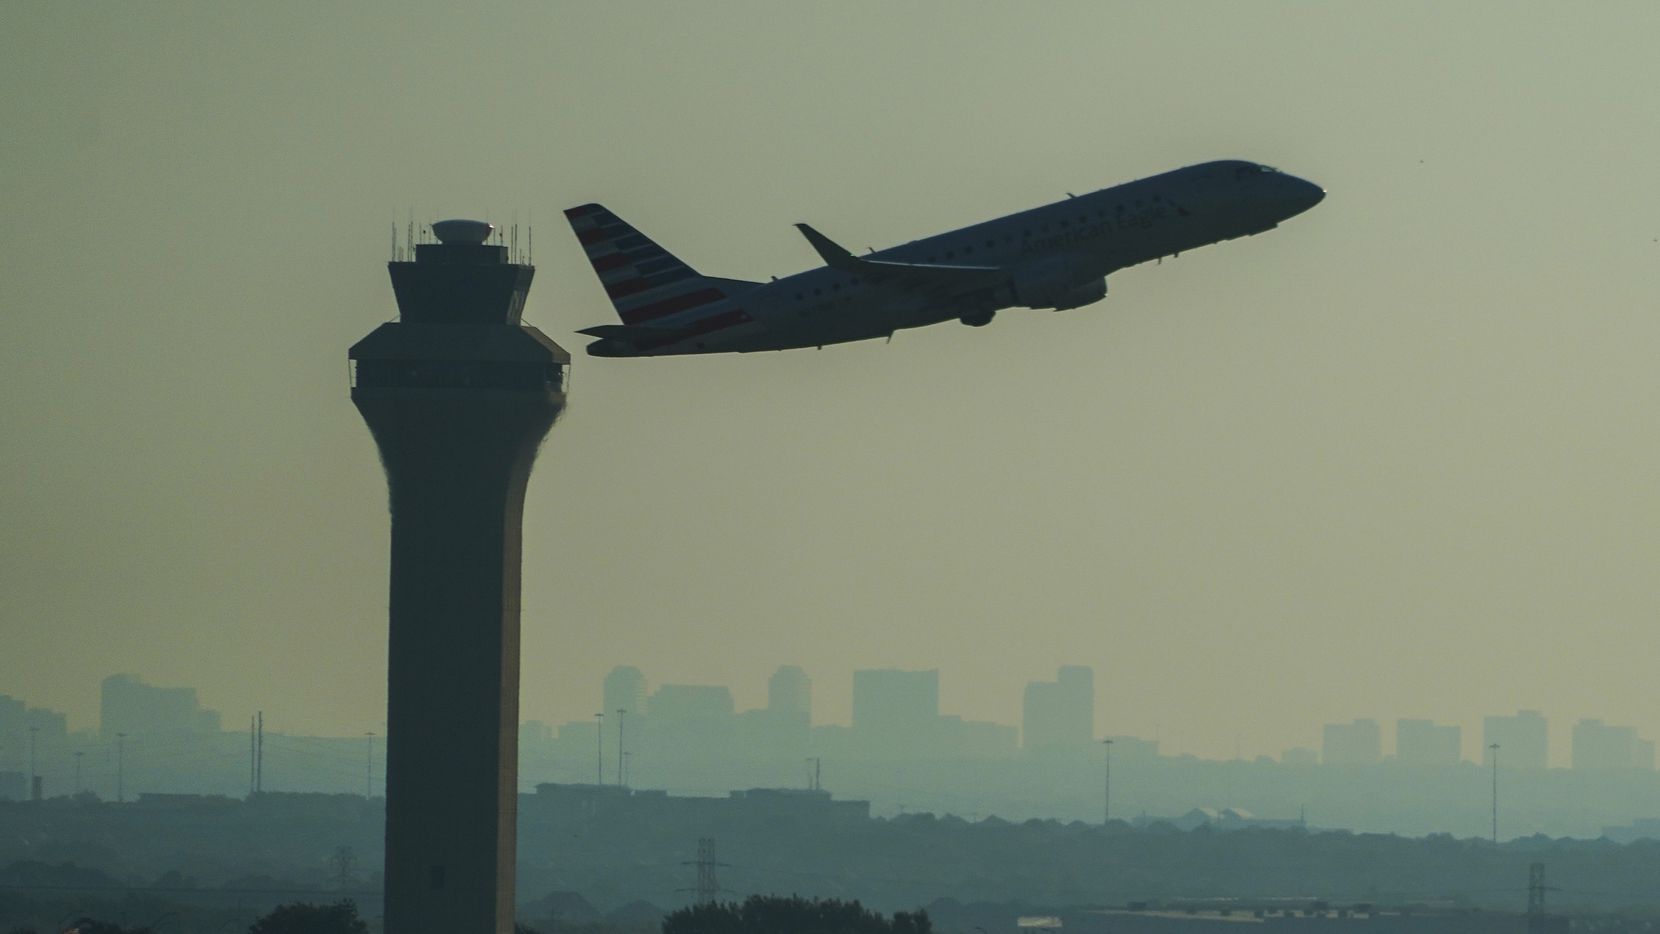 An American Eagle plane takes off at DFW International Airport in September.